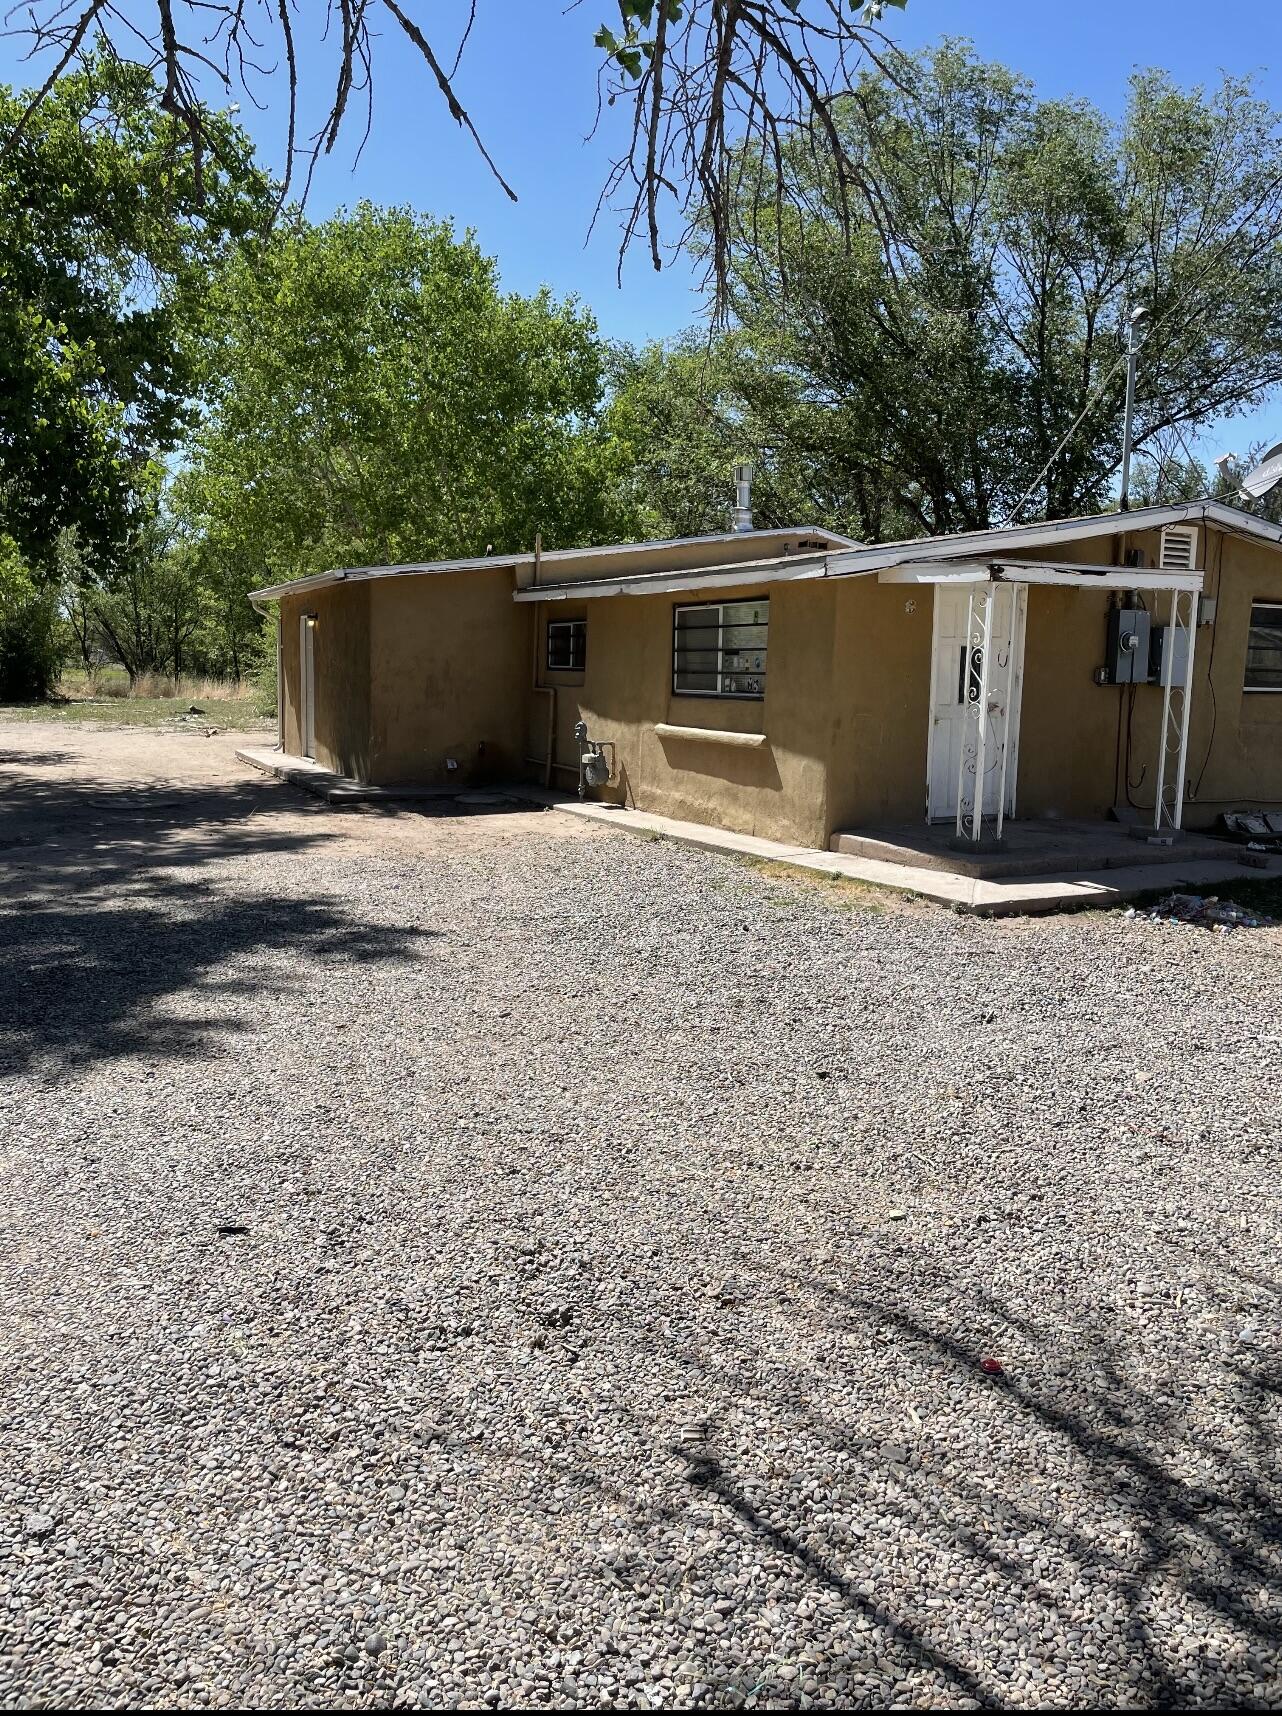 4 Bedroom 1 Bath home situated on .25 acres of land. House has some updated, but needs some TLC. Investment opportunity or handyman special. Come see today!